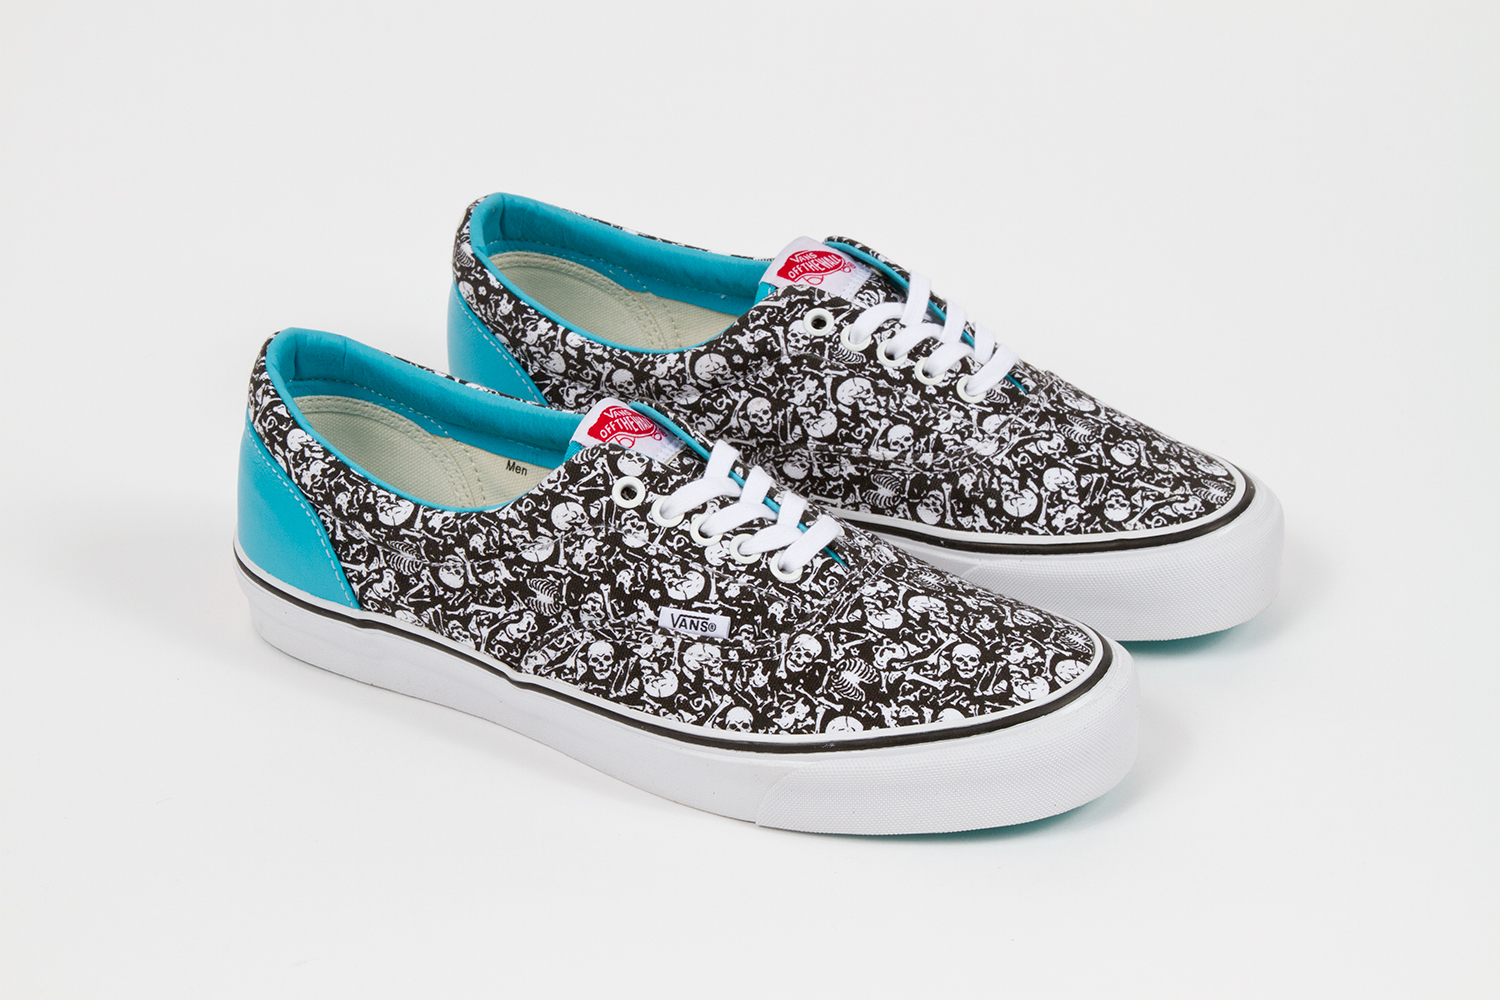 Stussy x Vans Vault Collection for Spring 2014 | Sole Collector